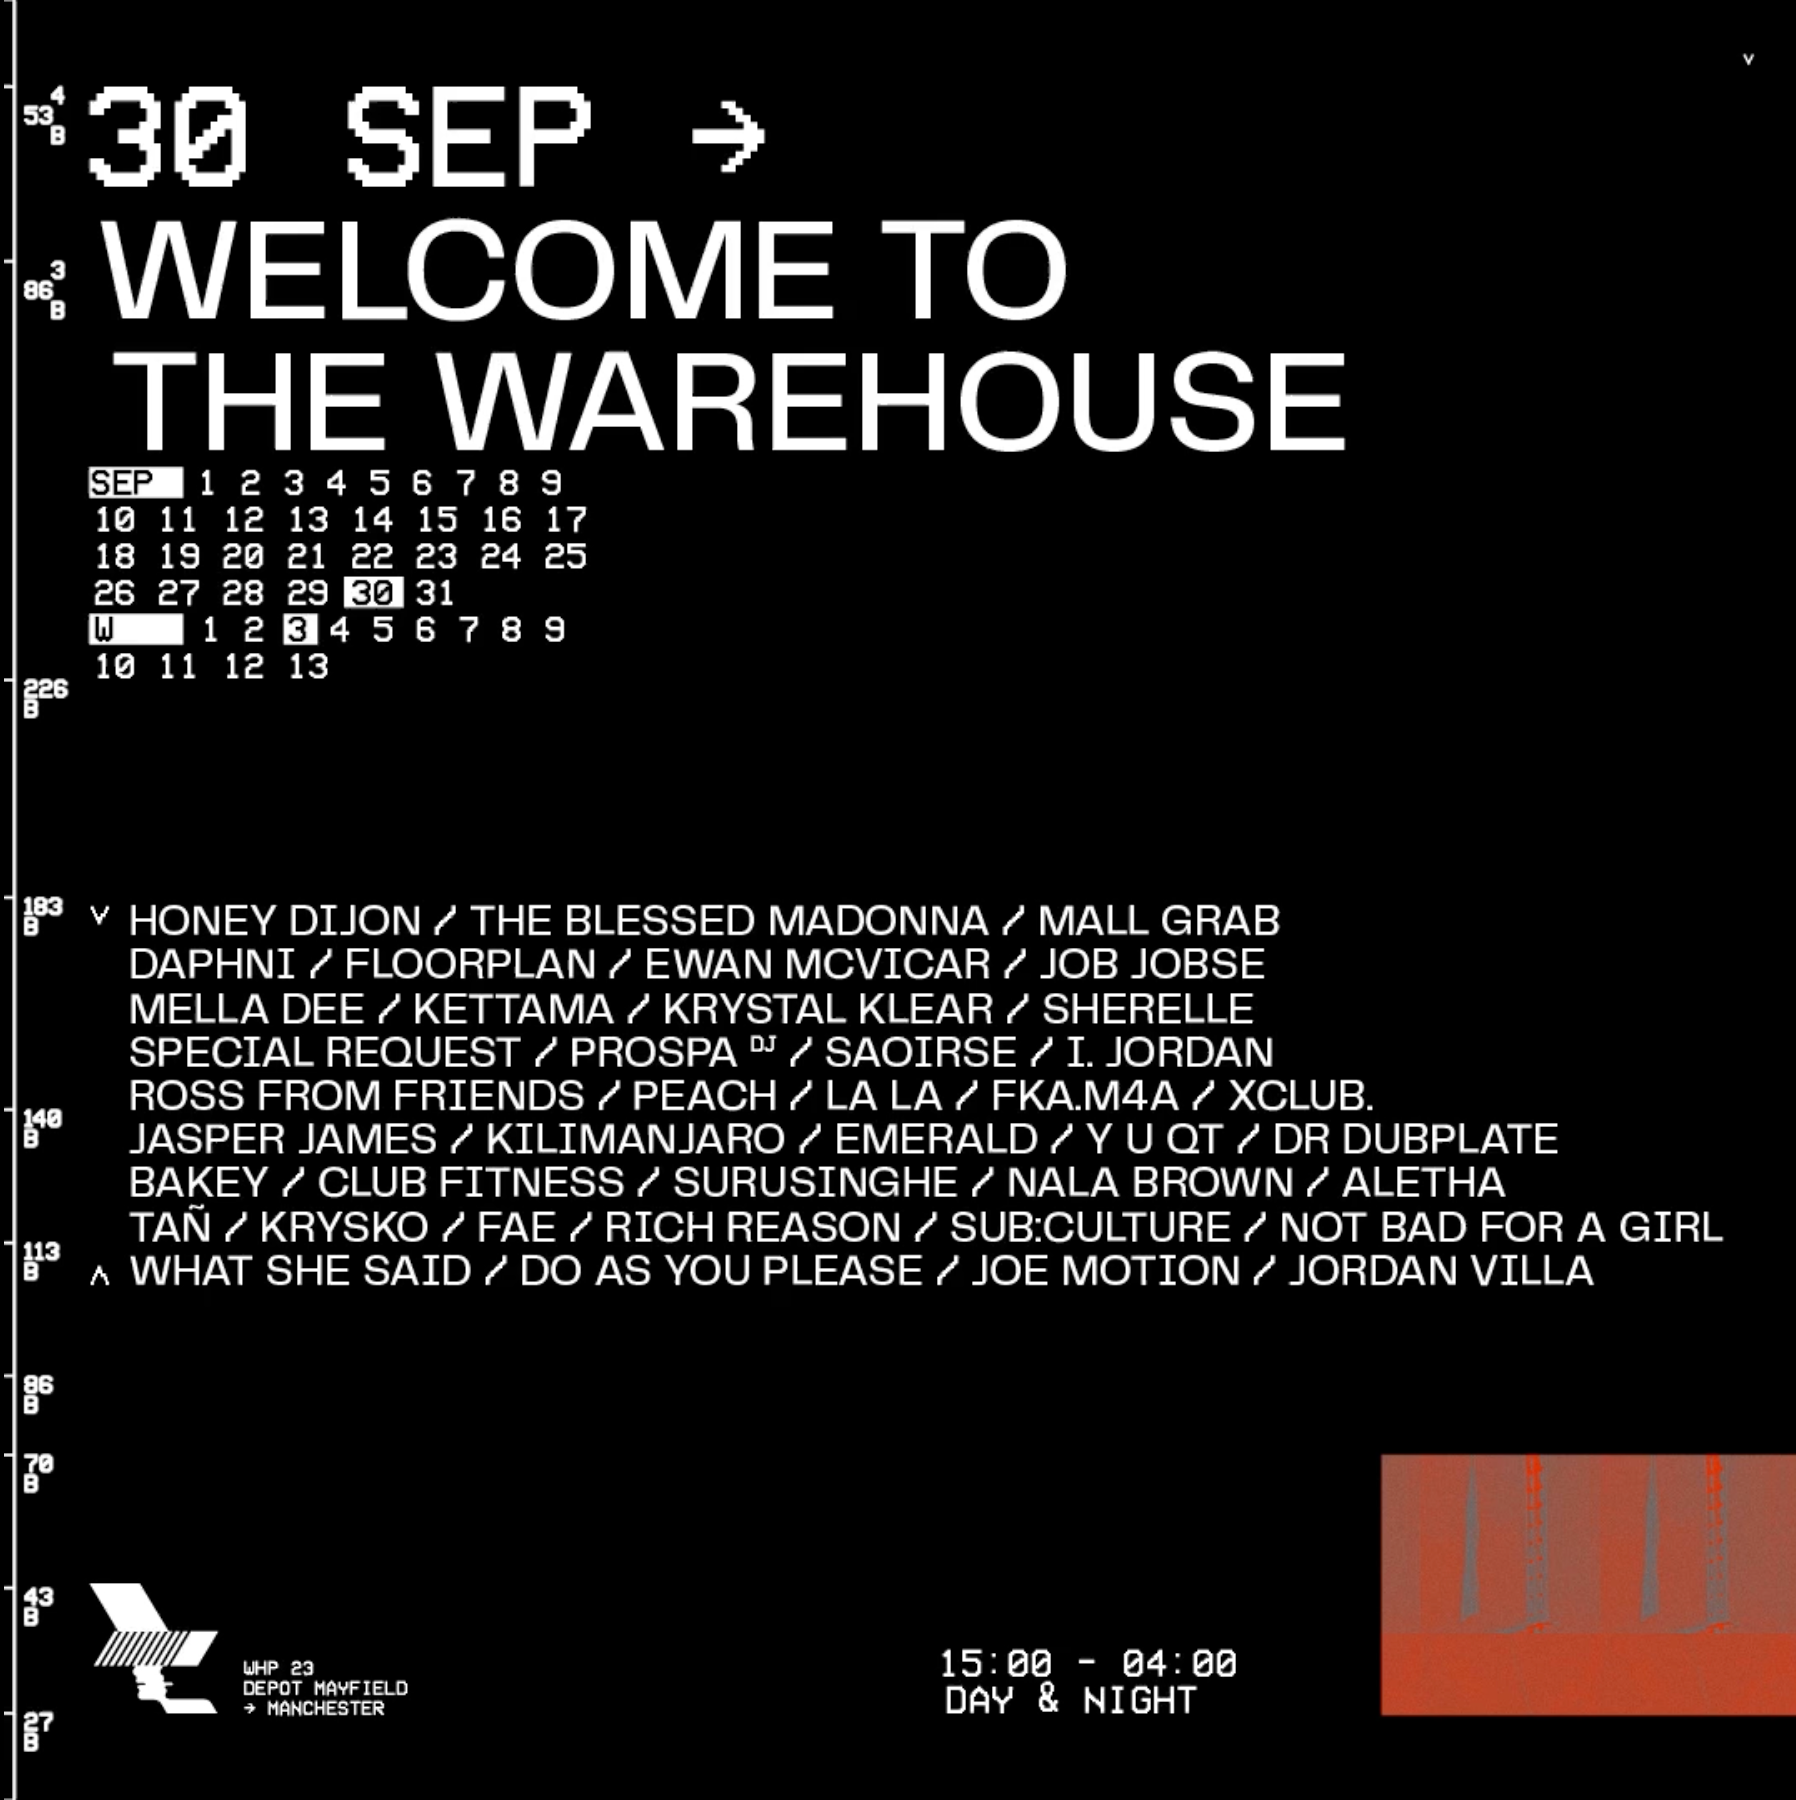 WELCOME TO THE WAREHOUSE - Página frontal